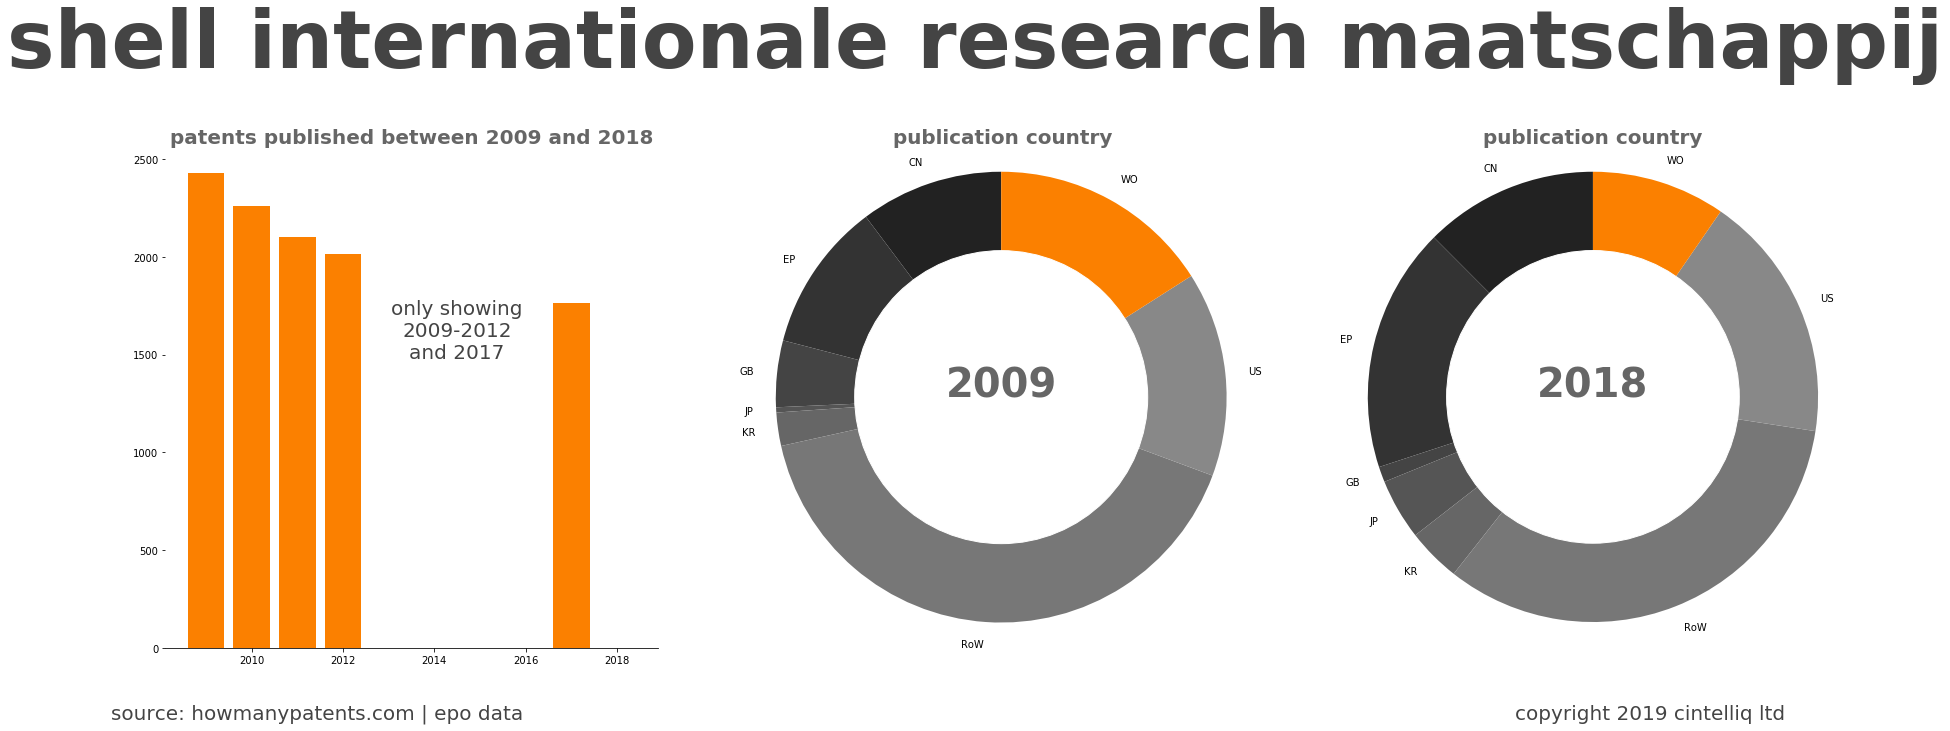 summary of patents for Shell Internationale Research Maatschappij